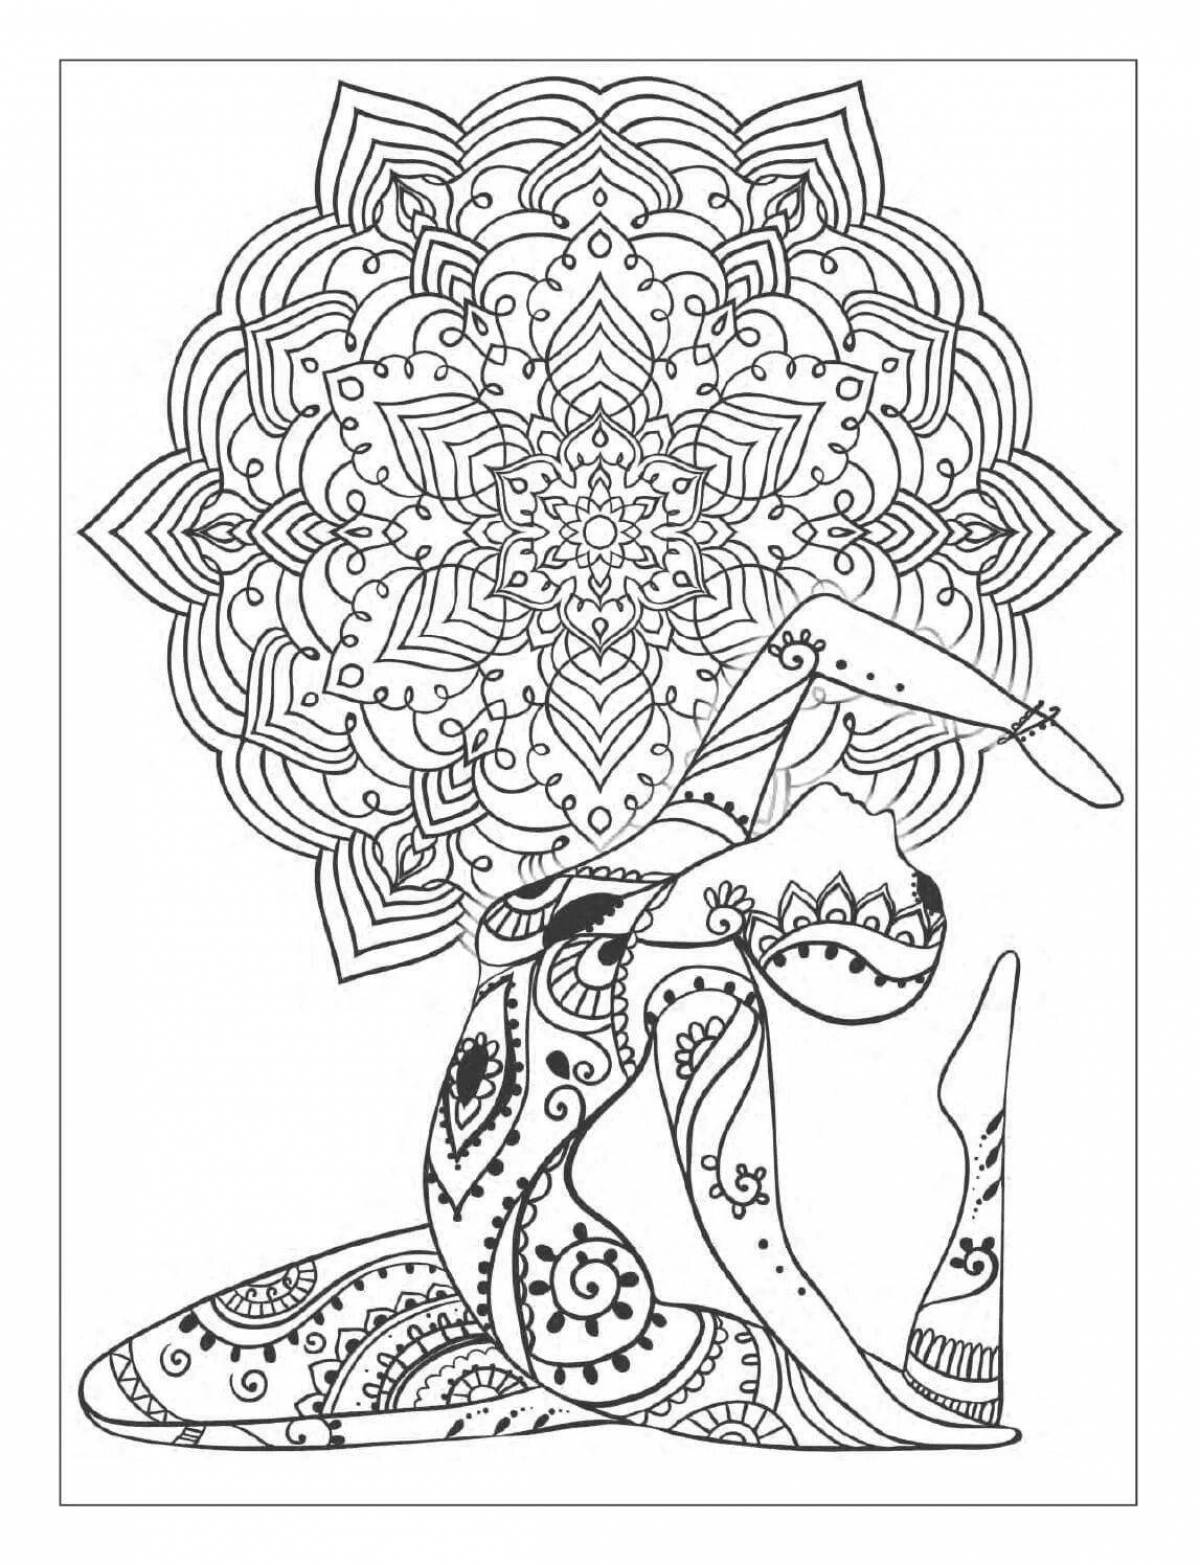 Coloring book for meditation and relaxation